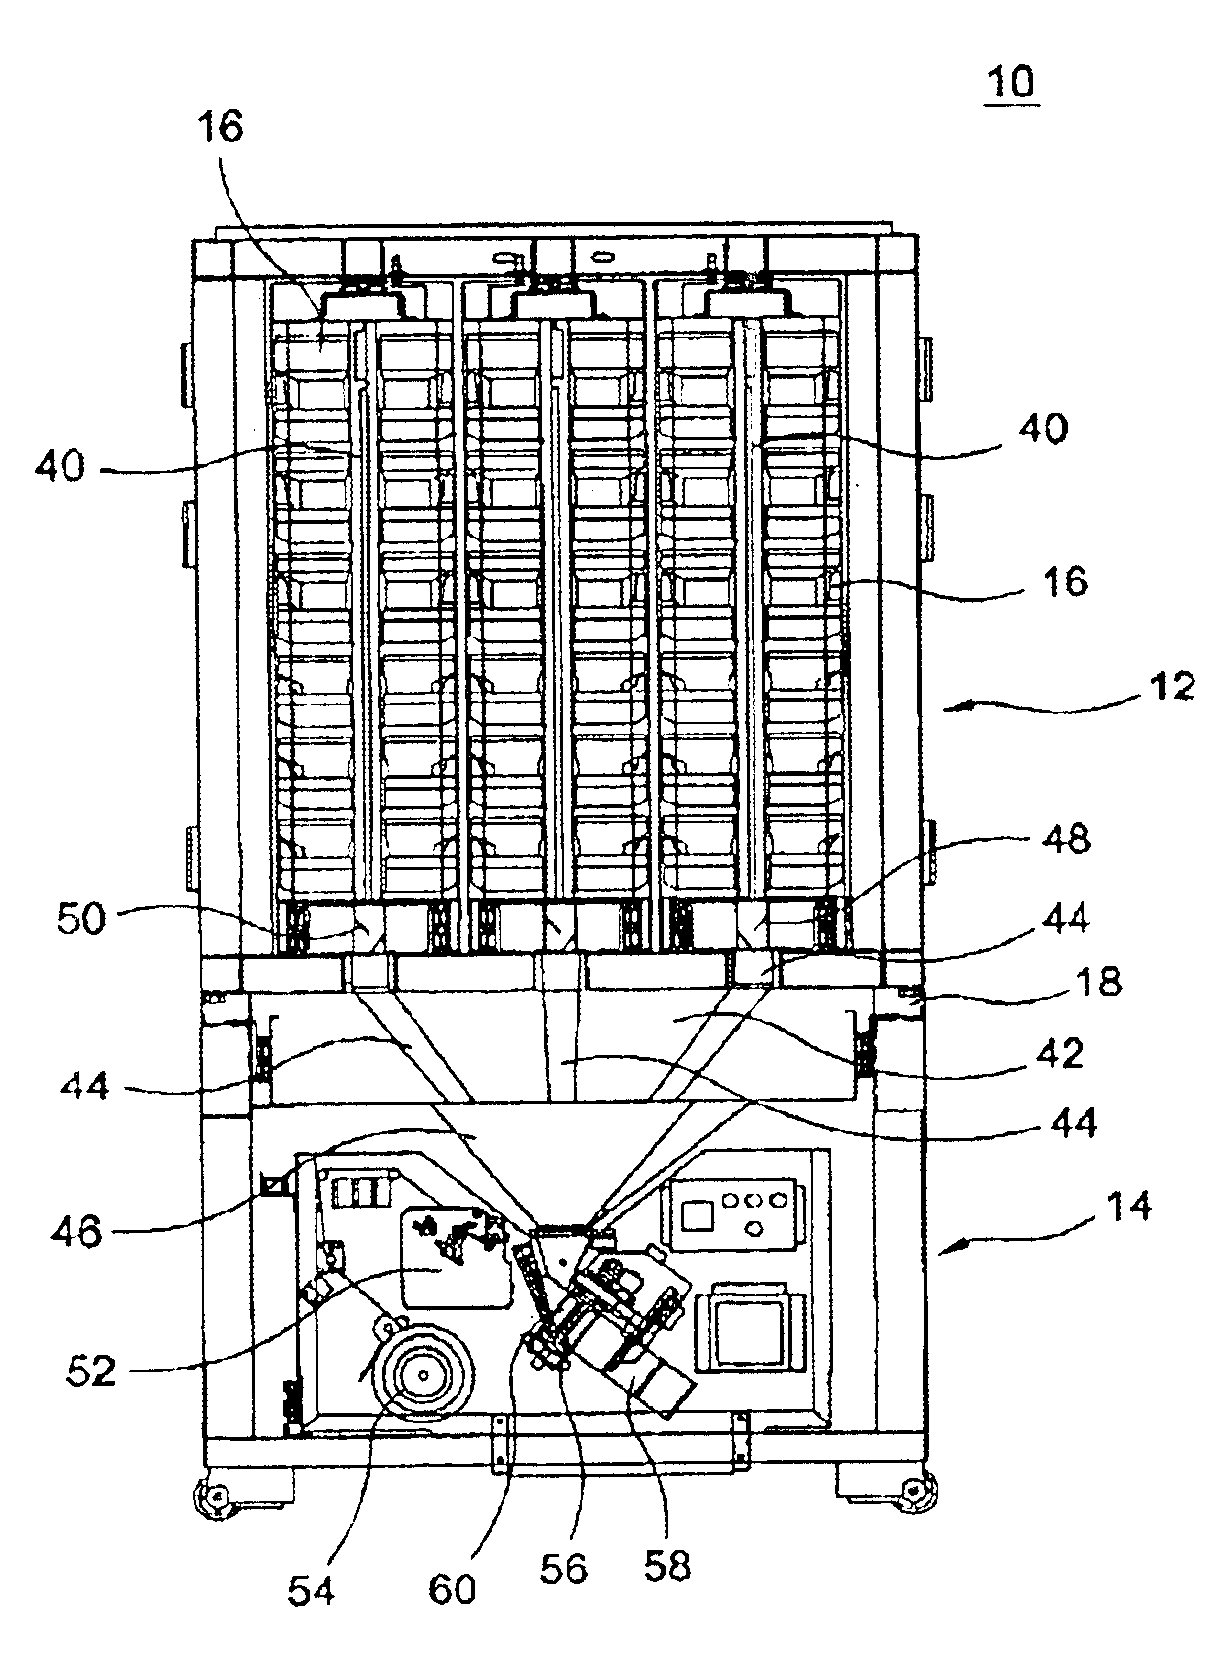 Automatic tablet dispensing and packaging system